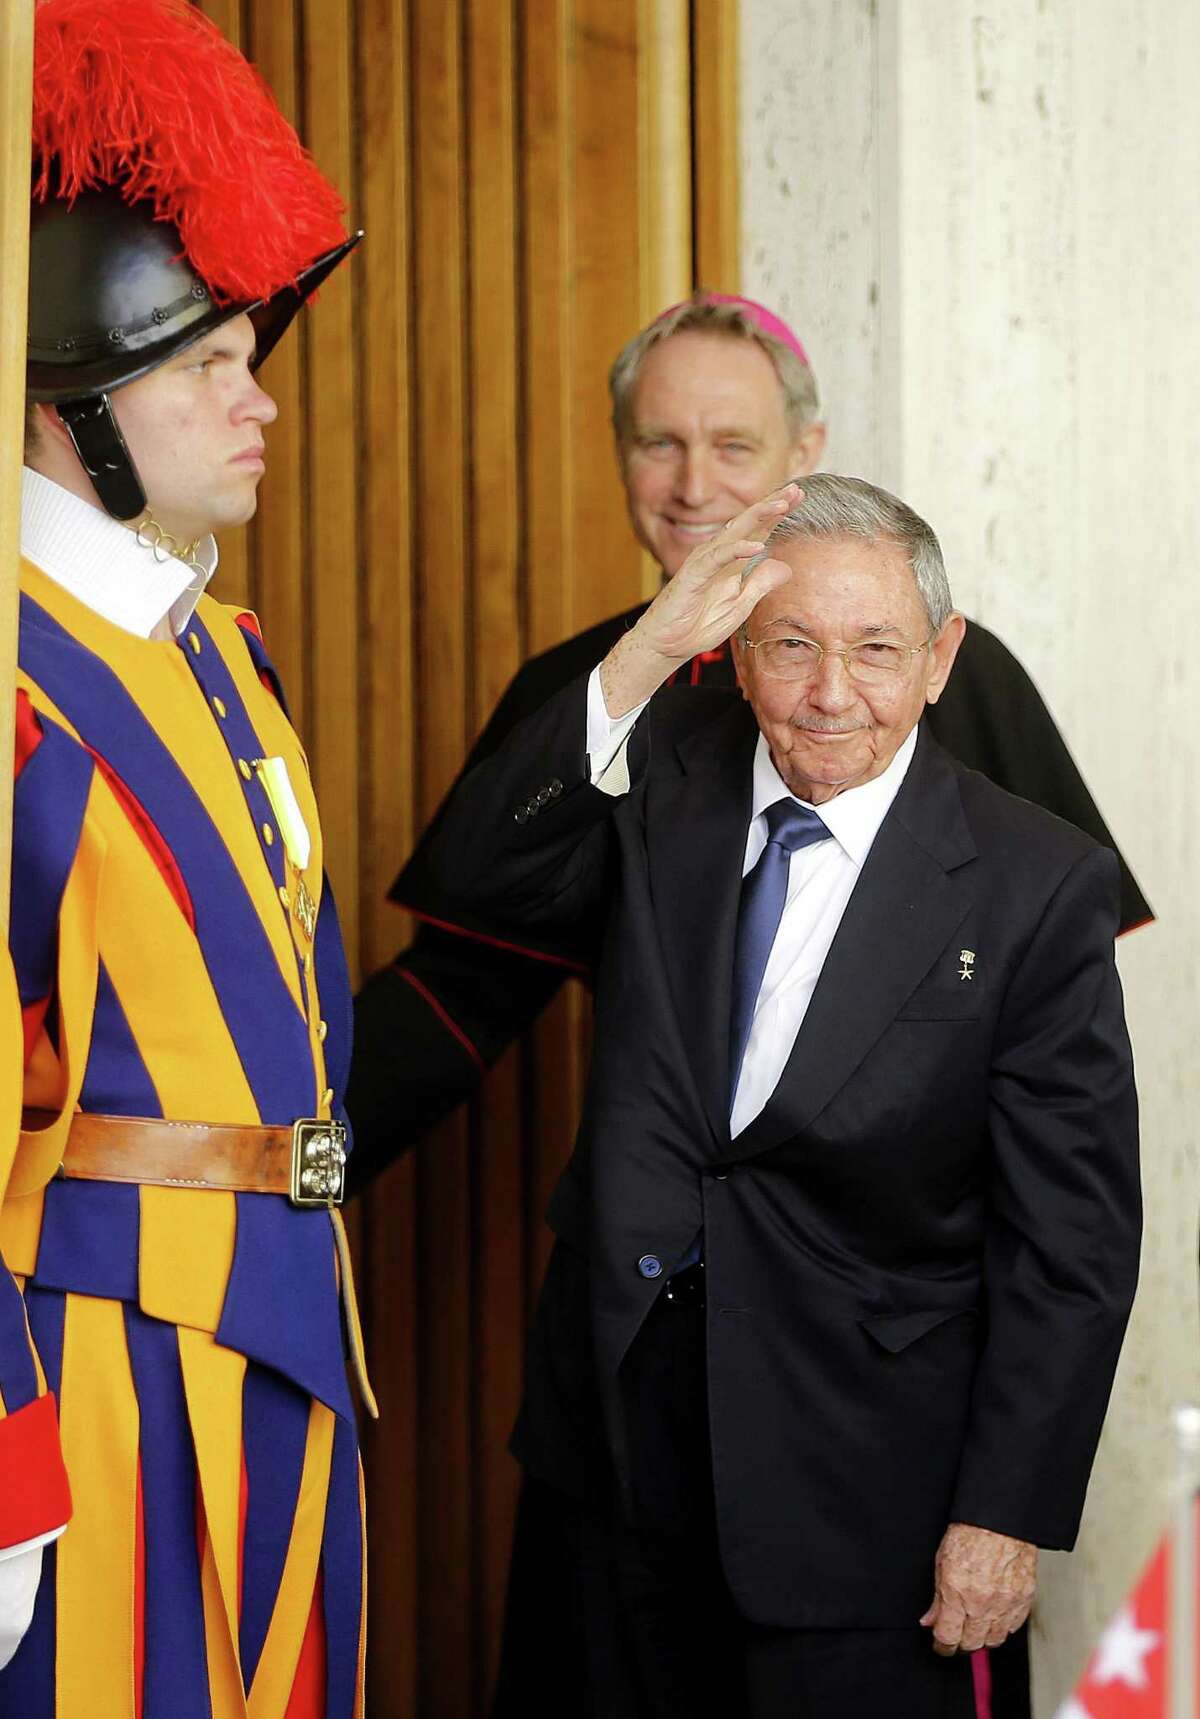 Cuban President Raul Castro waves as a Swiss Guard, left, and Archbishop George Gaenswein stand by him, prior to meeting Pope Francis, at the Vatican, Sunday, May 10, 2015. Cuban President Raul Castro received a warm welcome at the Vatican Sunday from Pope Francis, who played a key role in the breakthrough between Washington and Havana aimed at restoring U.S.-Cuban diplomatic ties, and later lavished praise on the pontiff for his "wisdom." (Fabio Frustaci/ANSA via AP)